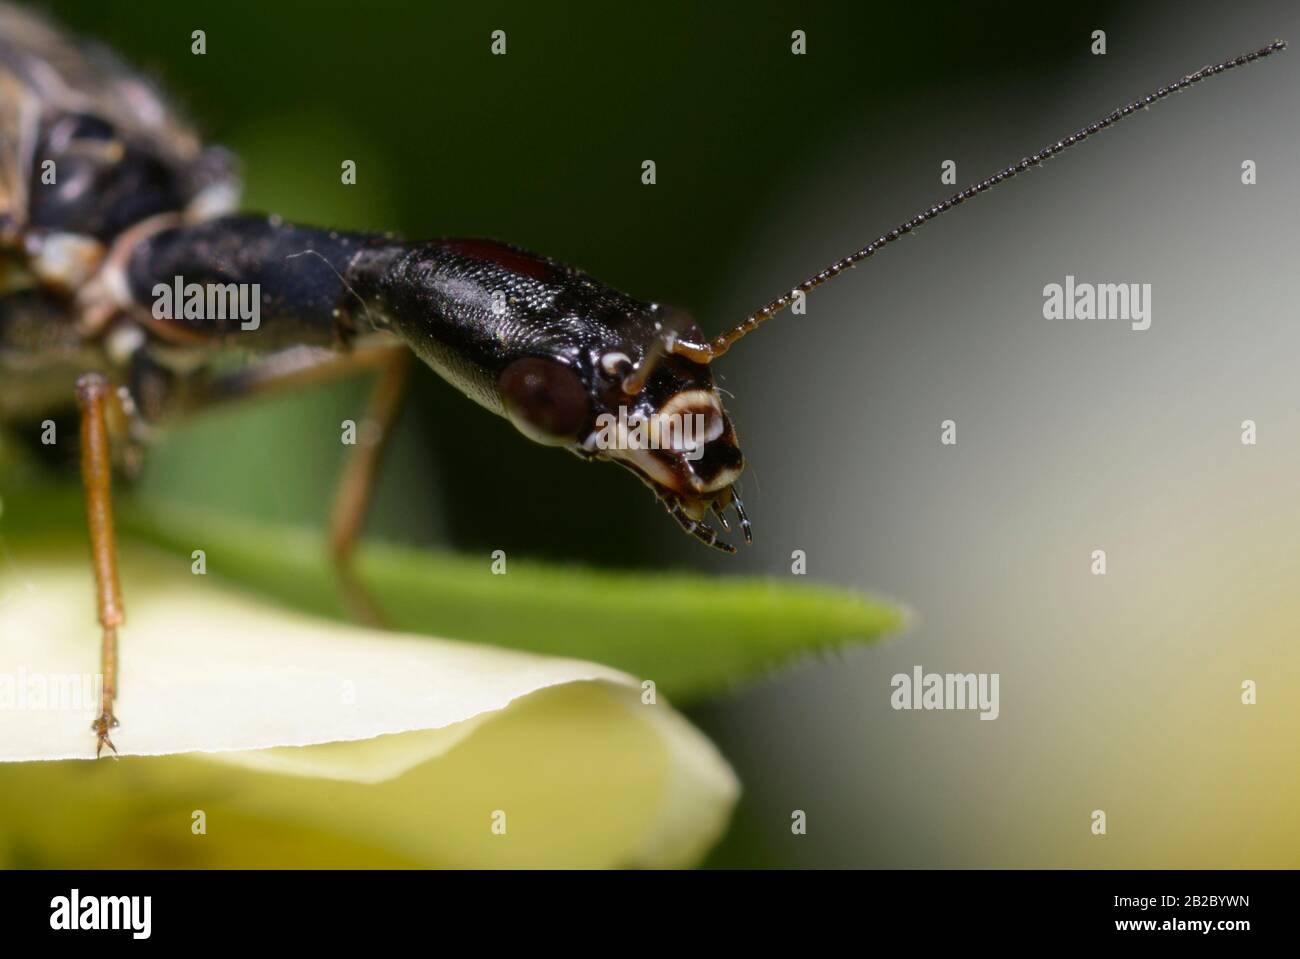 Head of the snakefly Raphidioptera sitting on the tiny forest flower Stock Photo